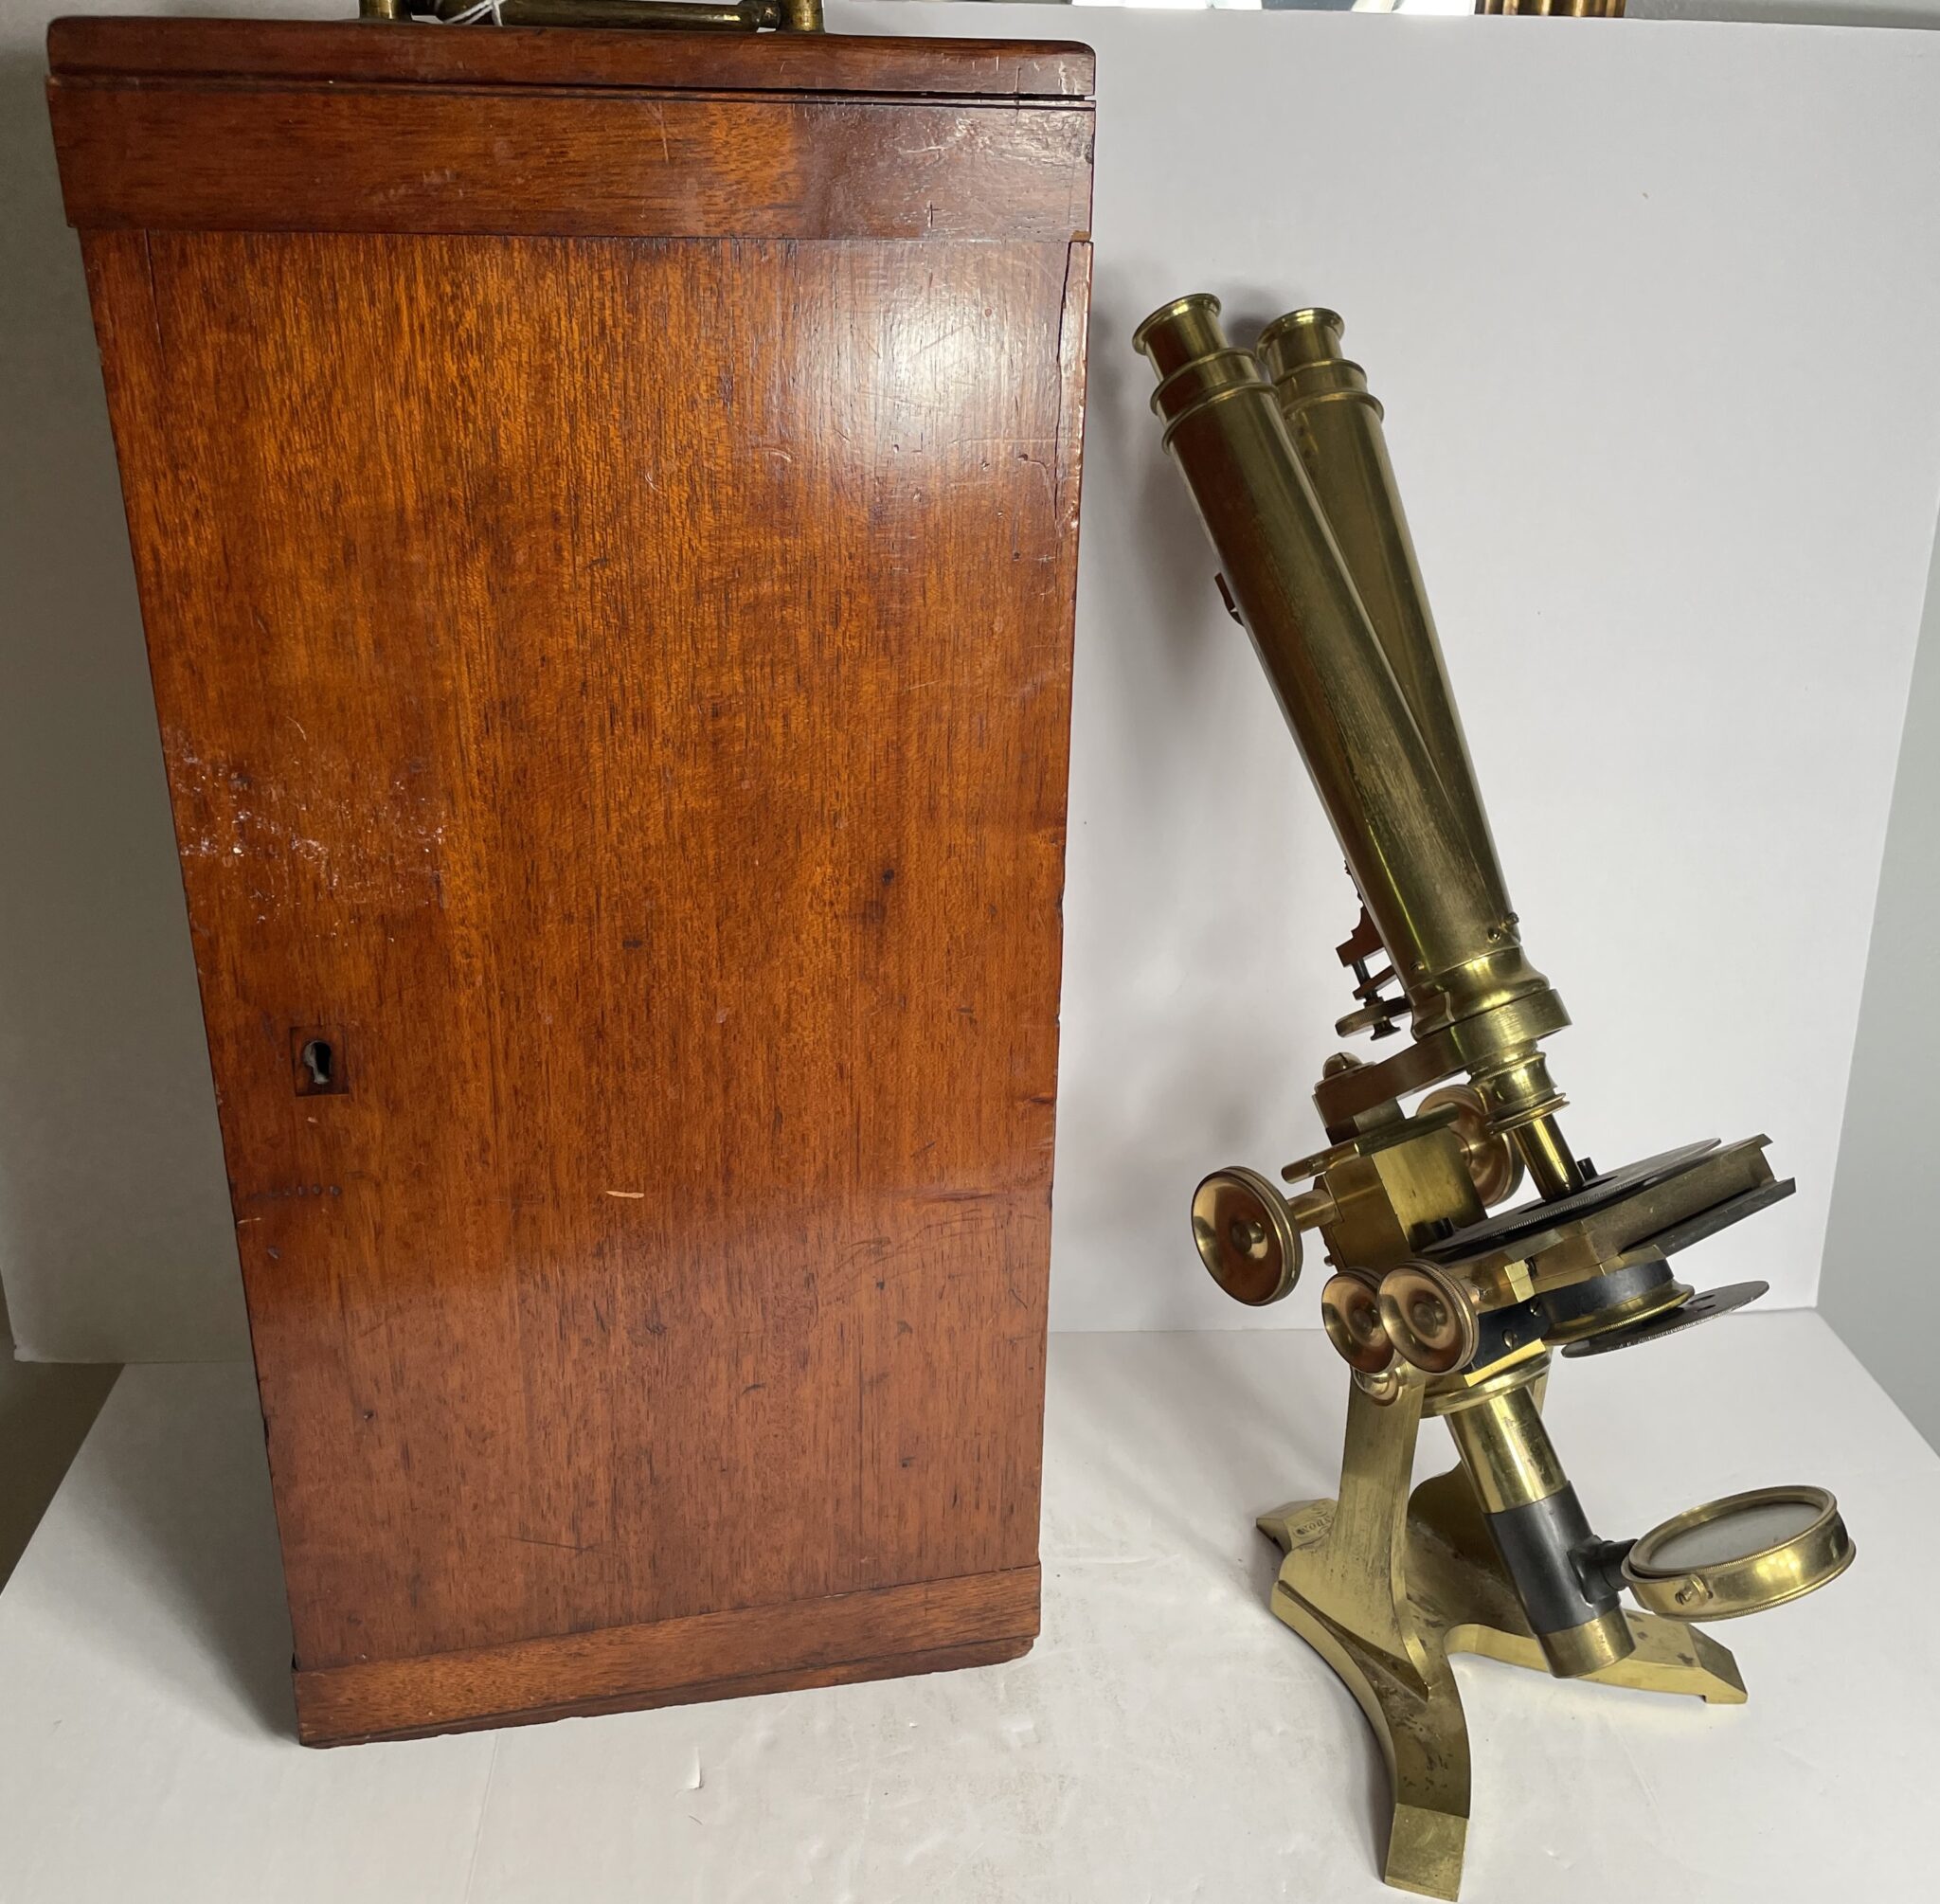 Large signed Newton & Co Binocular Microscope C 1880 with case and accessories